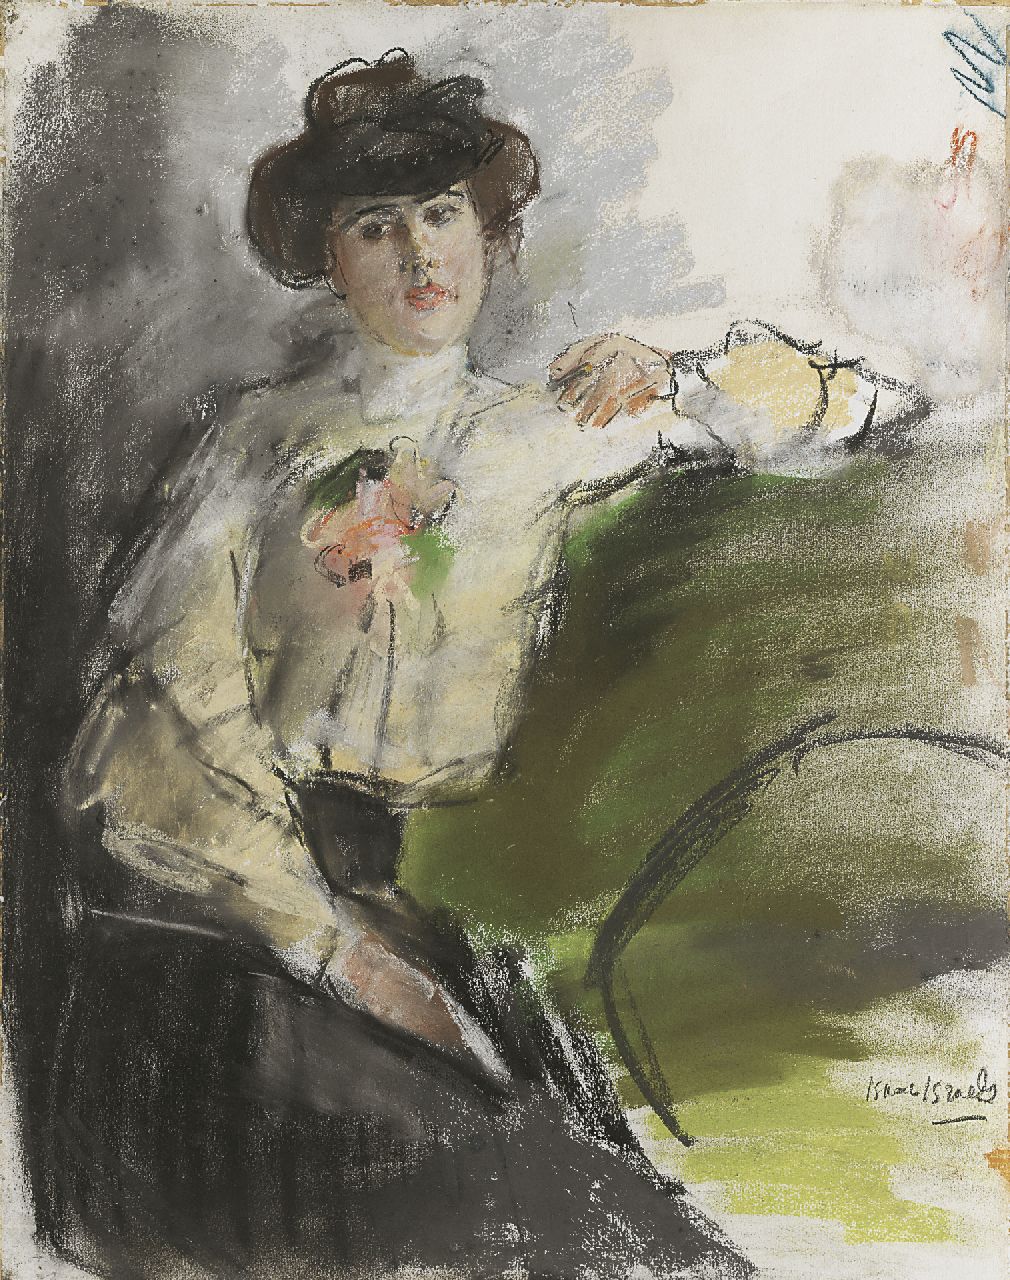 Israels I.L.  | 'Isaac' Lazarus Israels, Seamstress smoking, pastel on paper 57.0 x 47.0 cm, signed l.r. and painted circa 1905